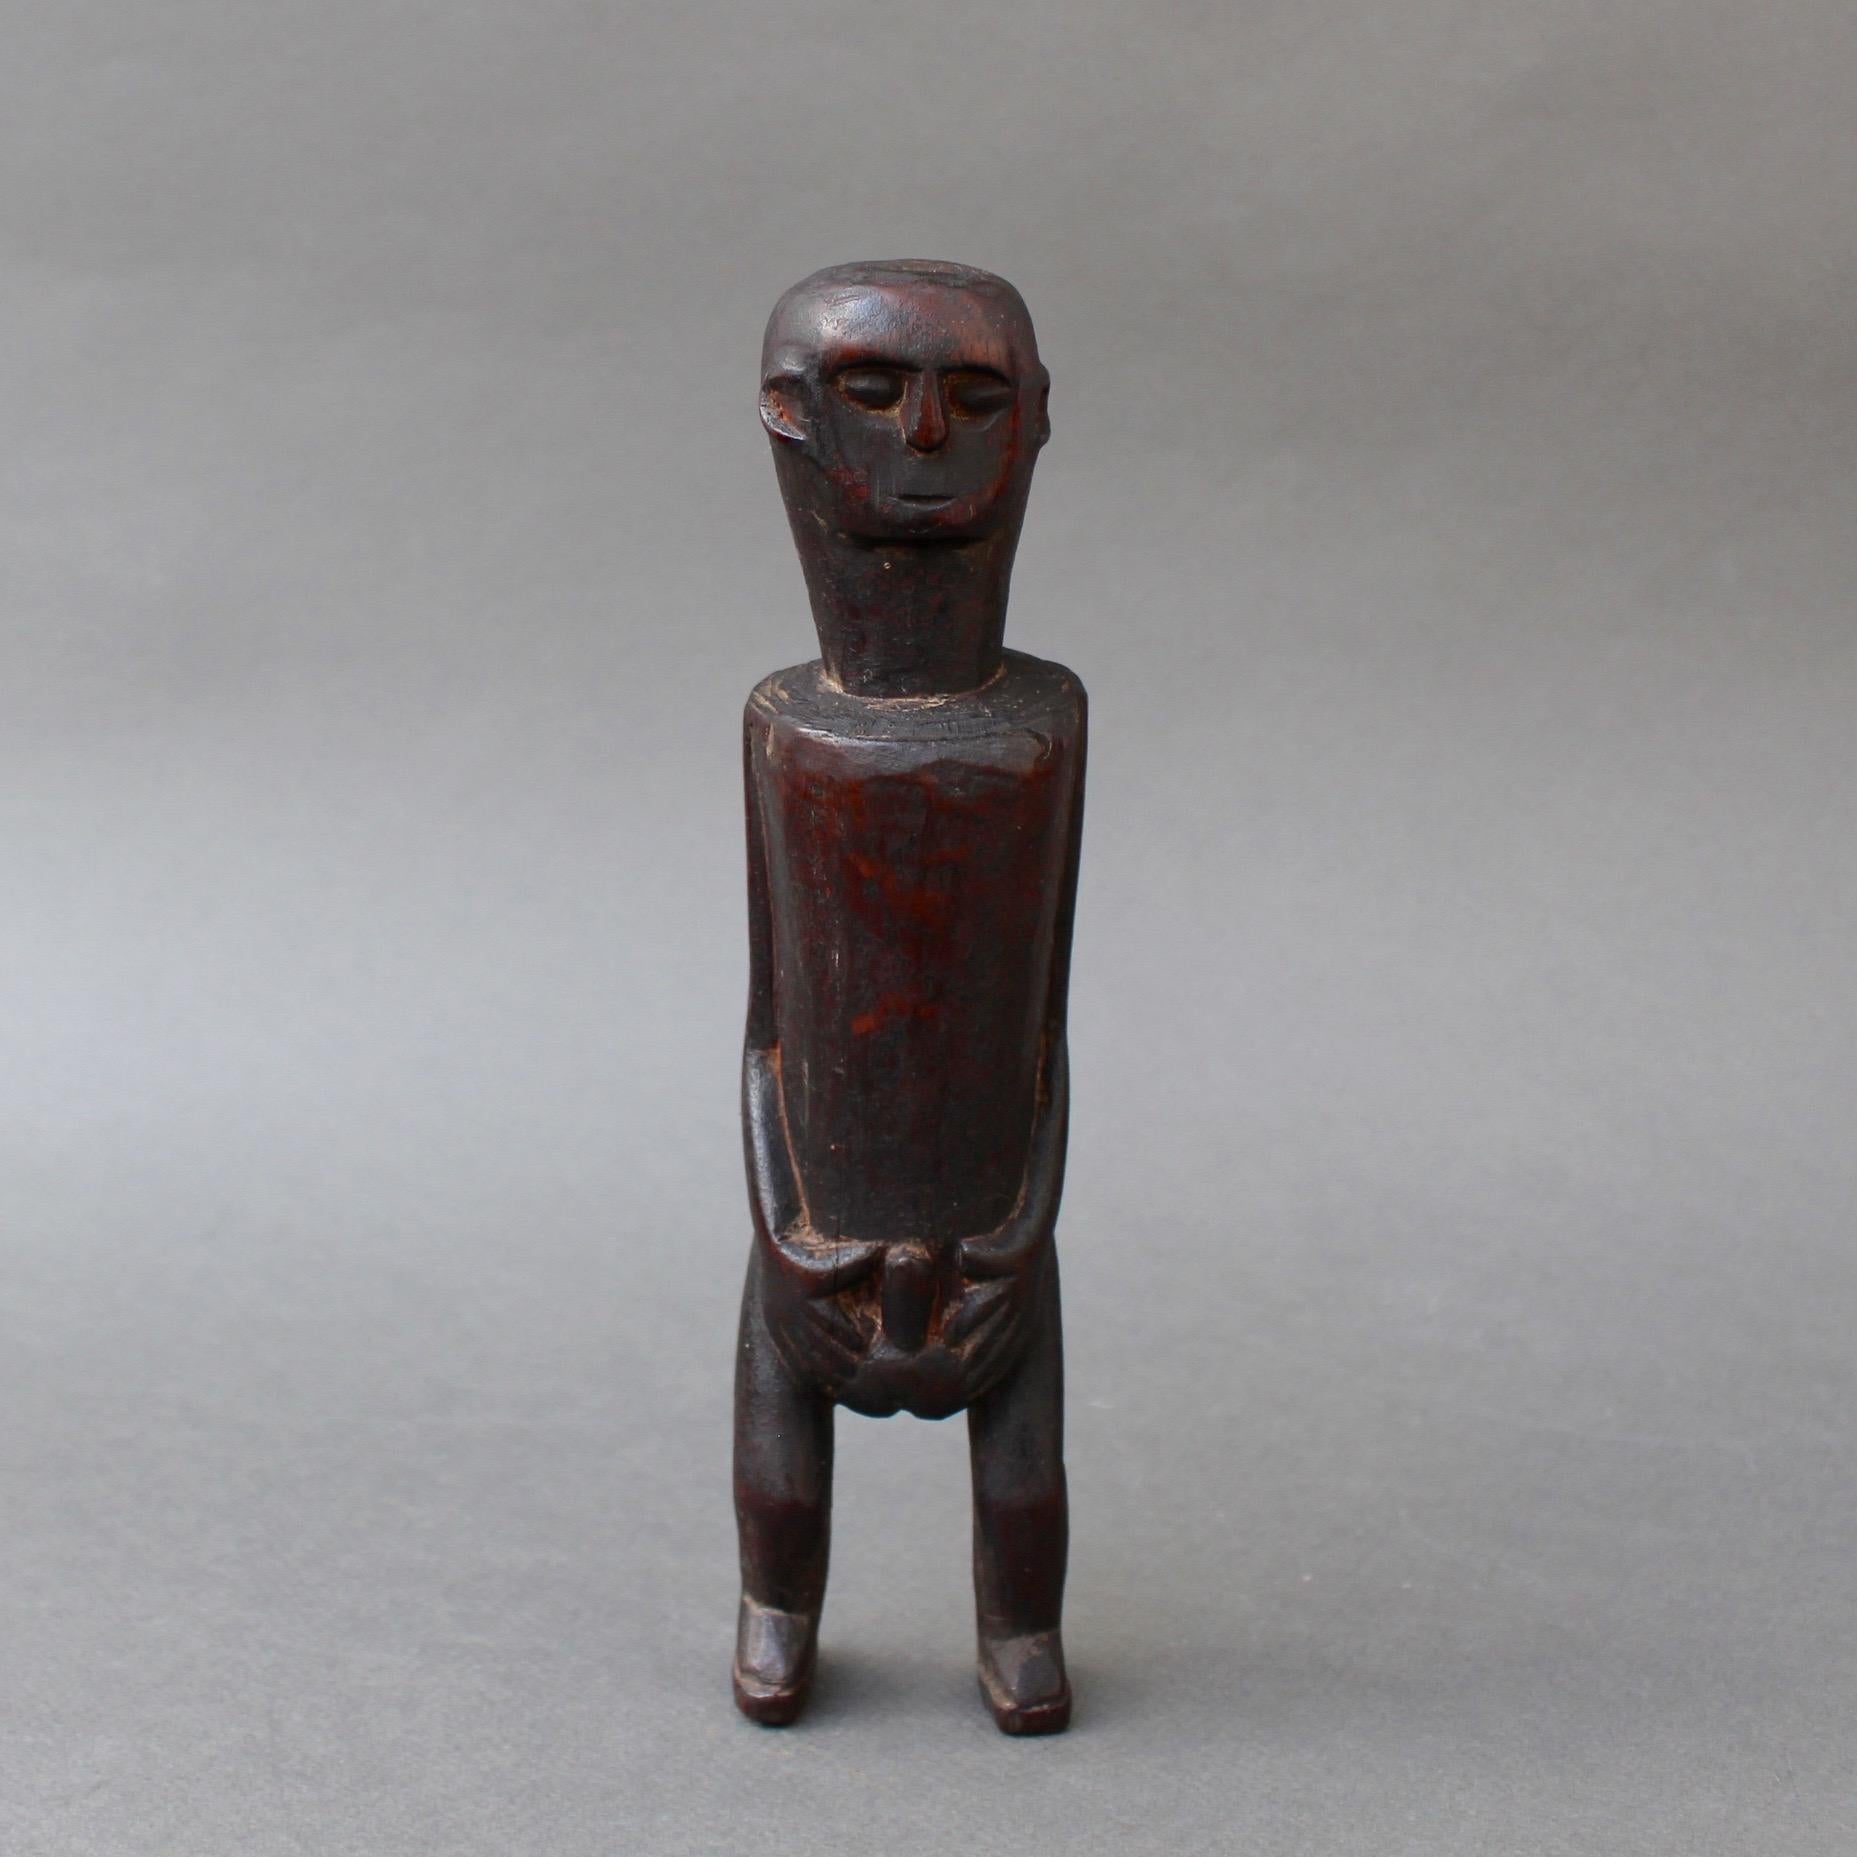 20th Century Wooden Sculpture or Carving of Fertility Figure from Sumba Island, Indonesia